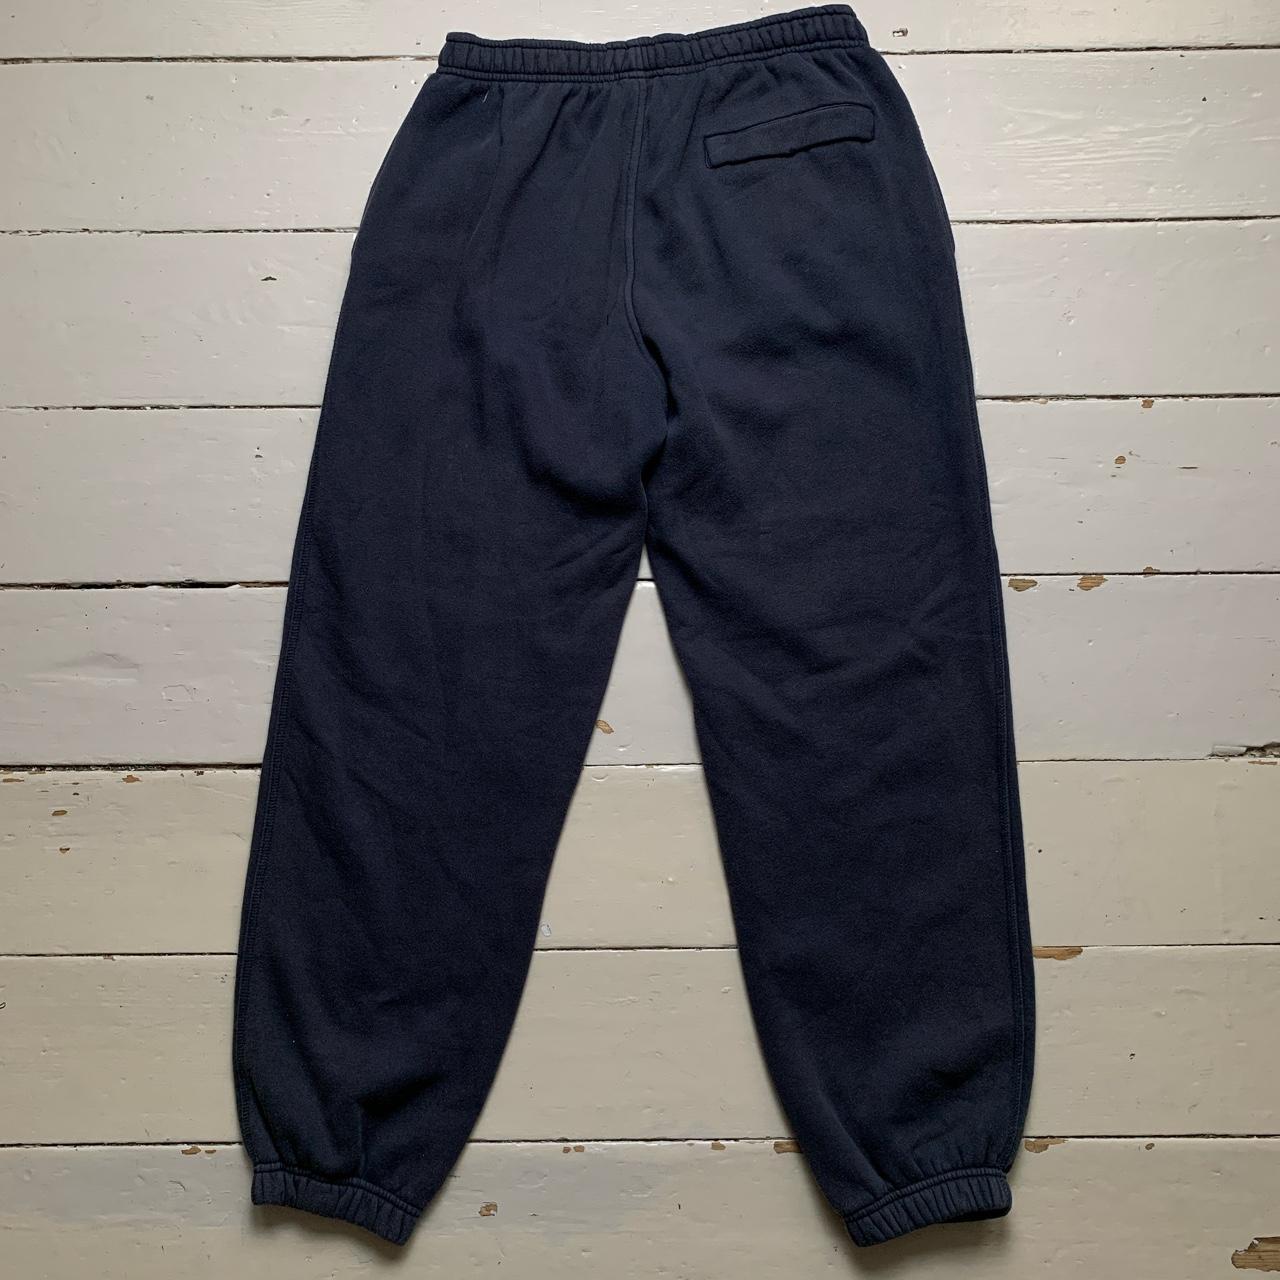 Nike Swoosh Navy and White Athletic Department Joggers